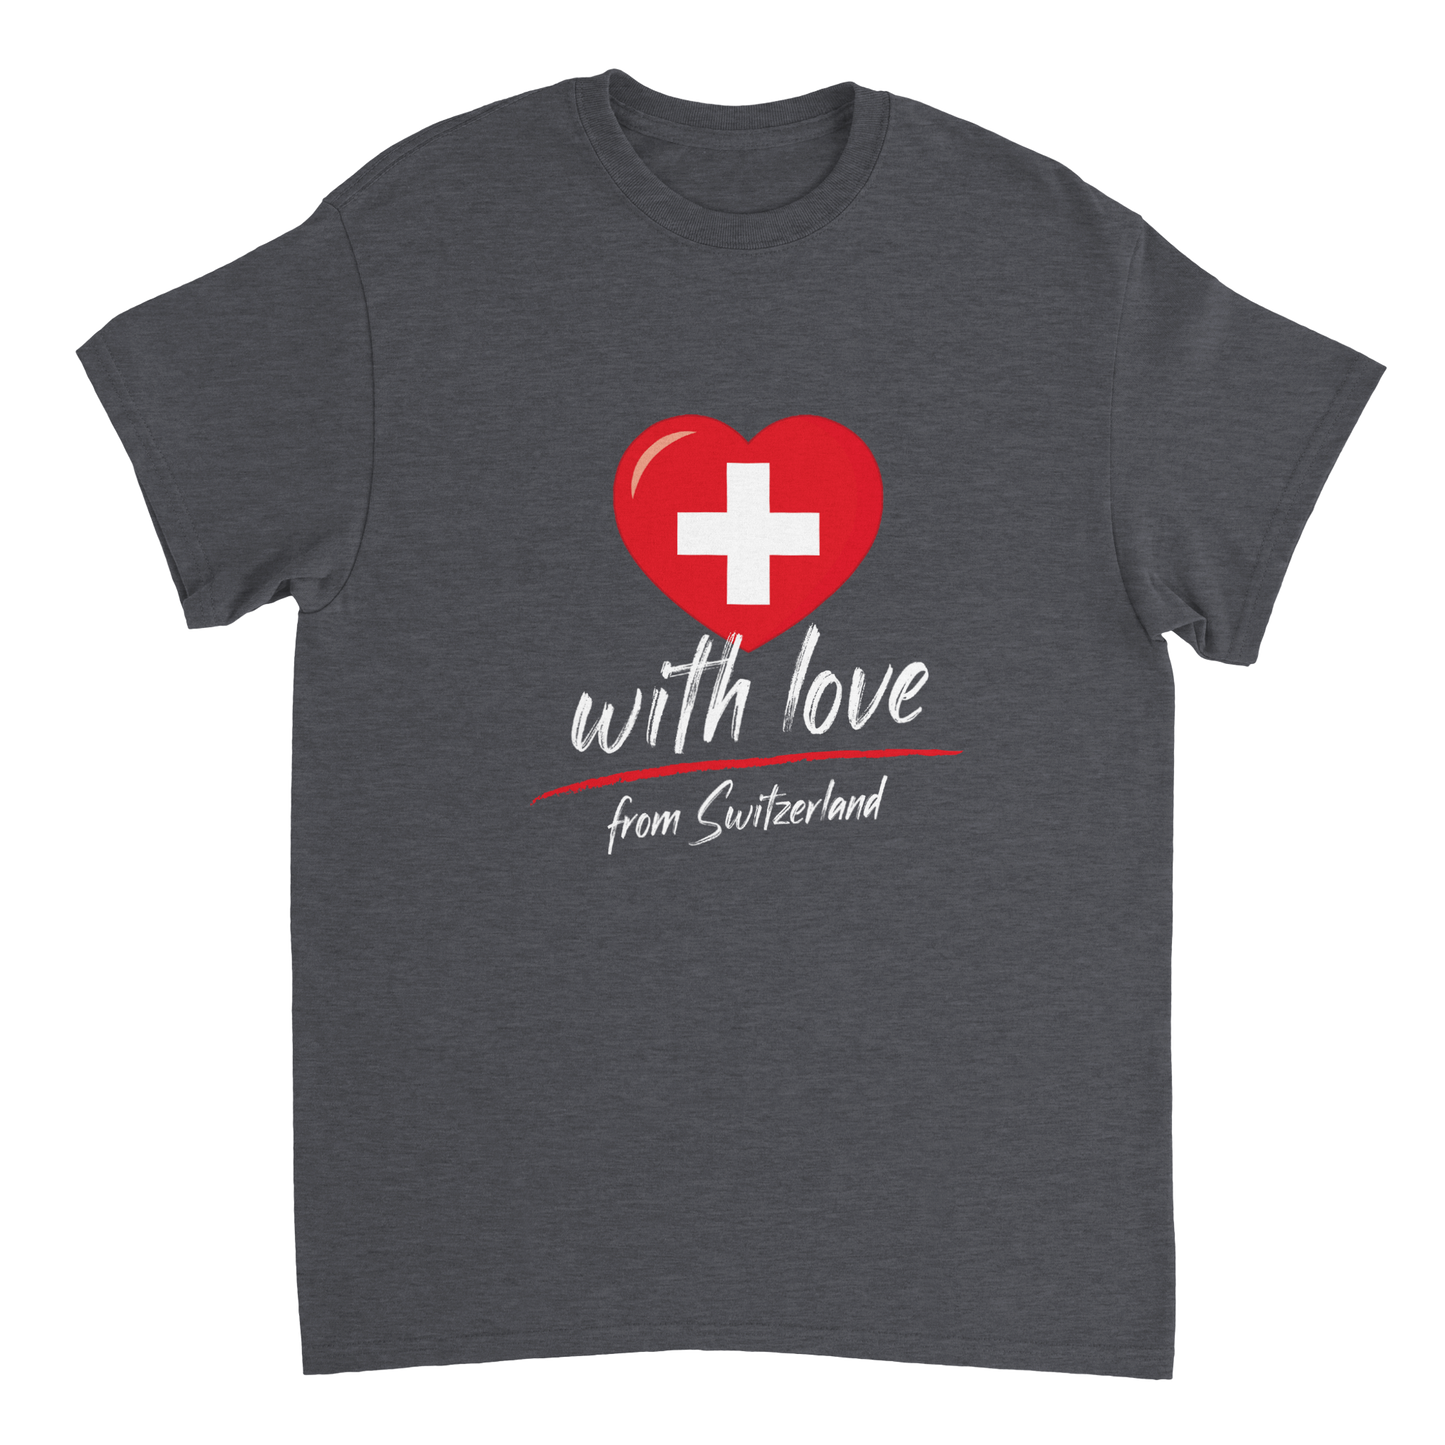 With love from Switzerland – T-Shirt